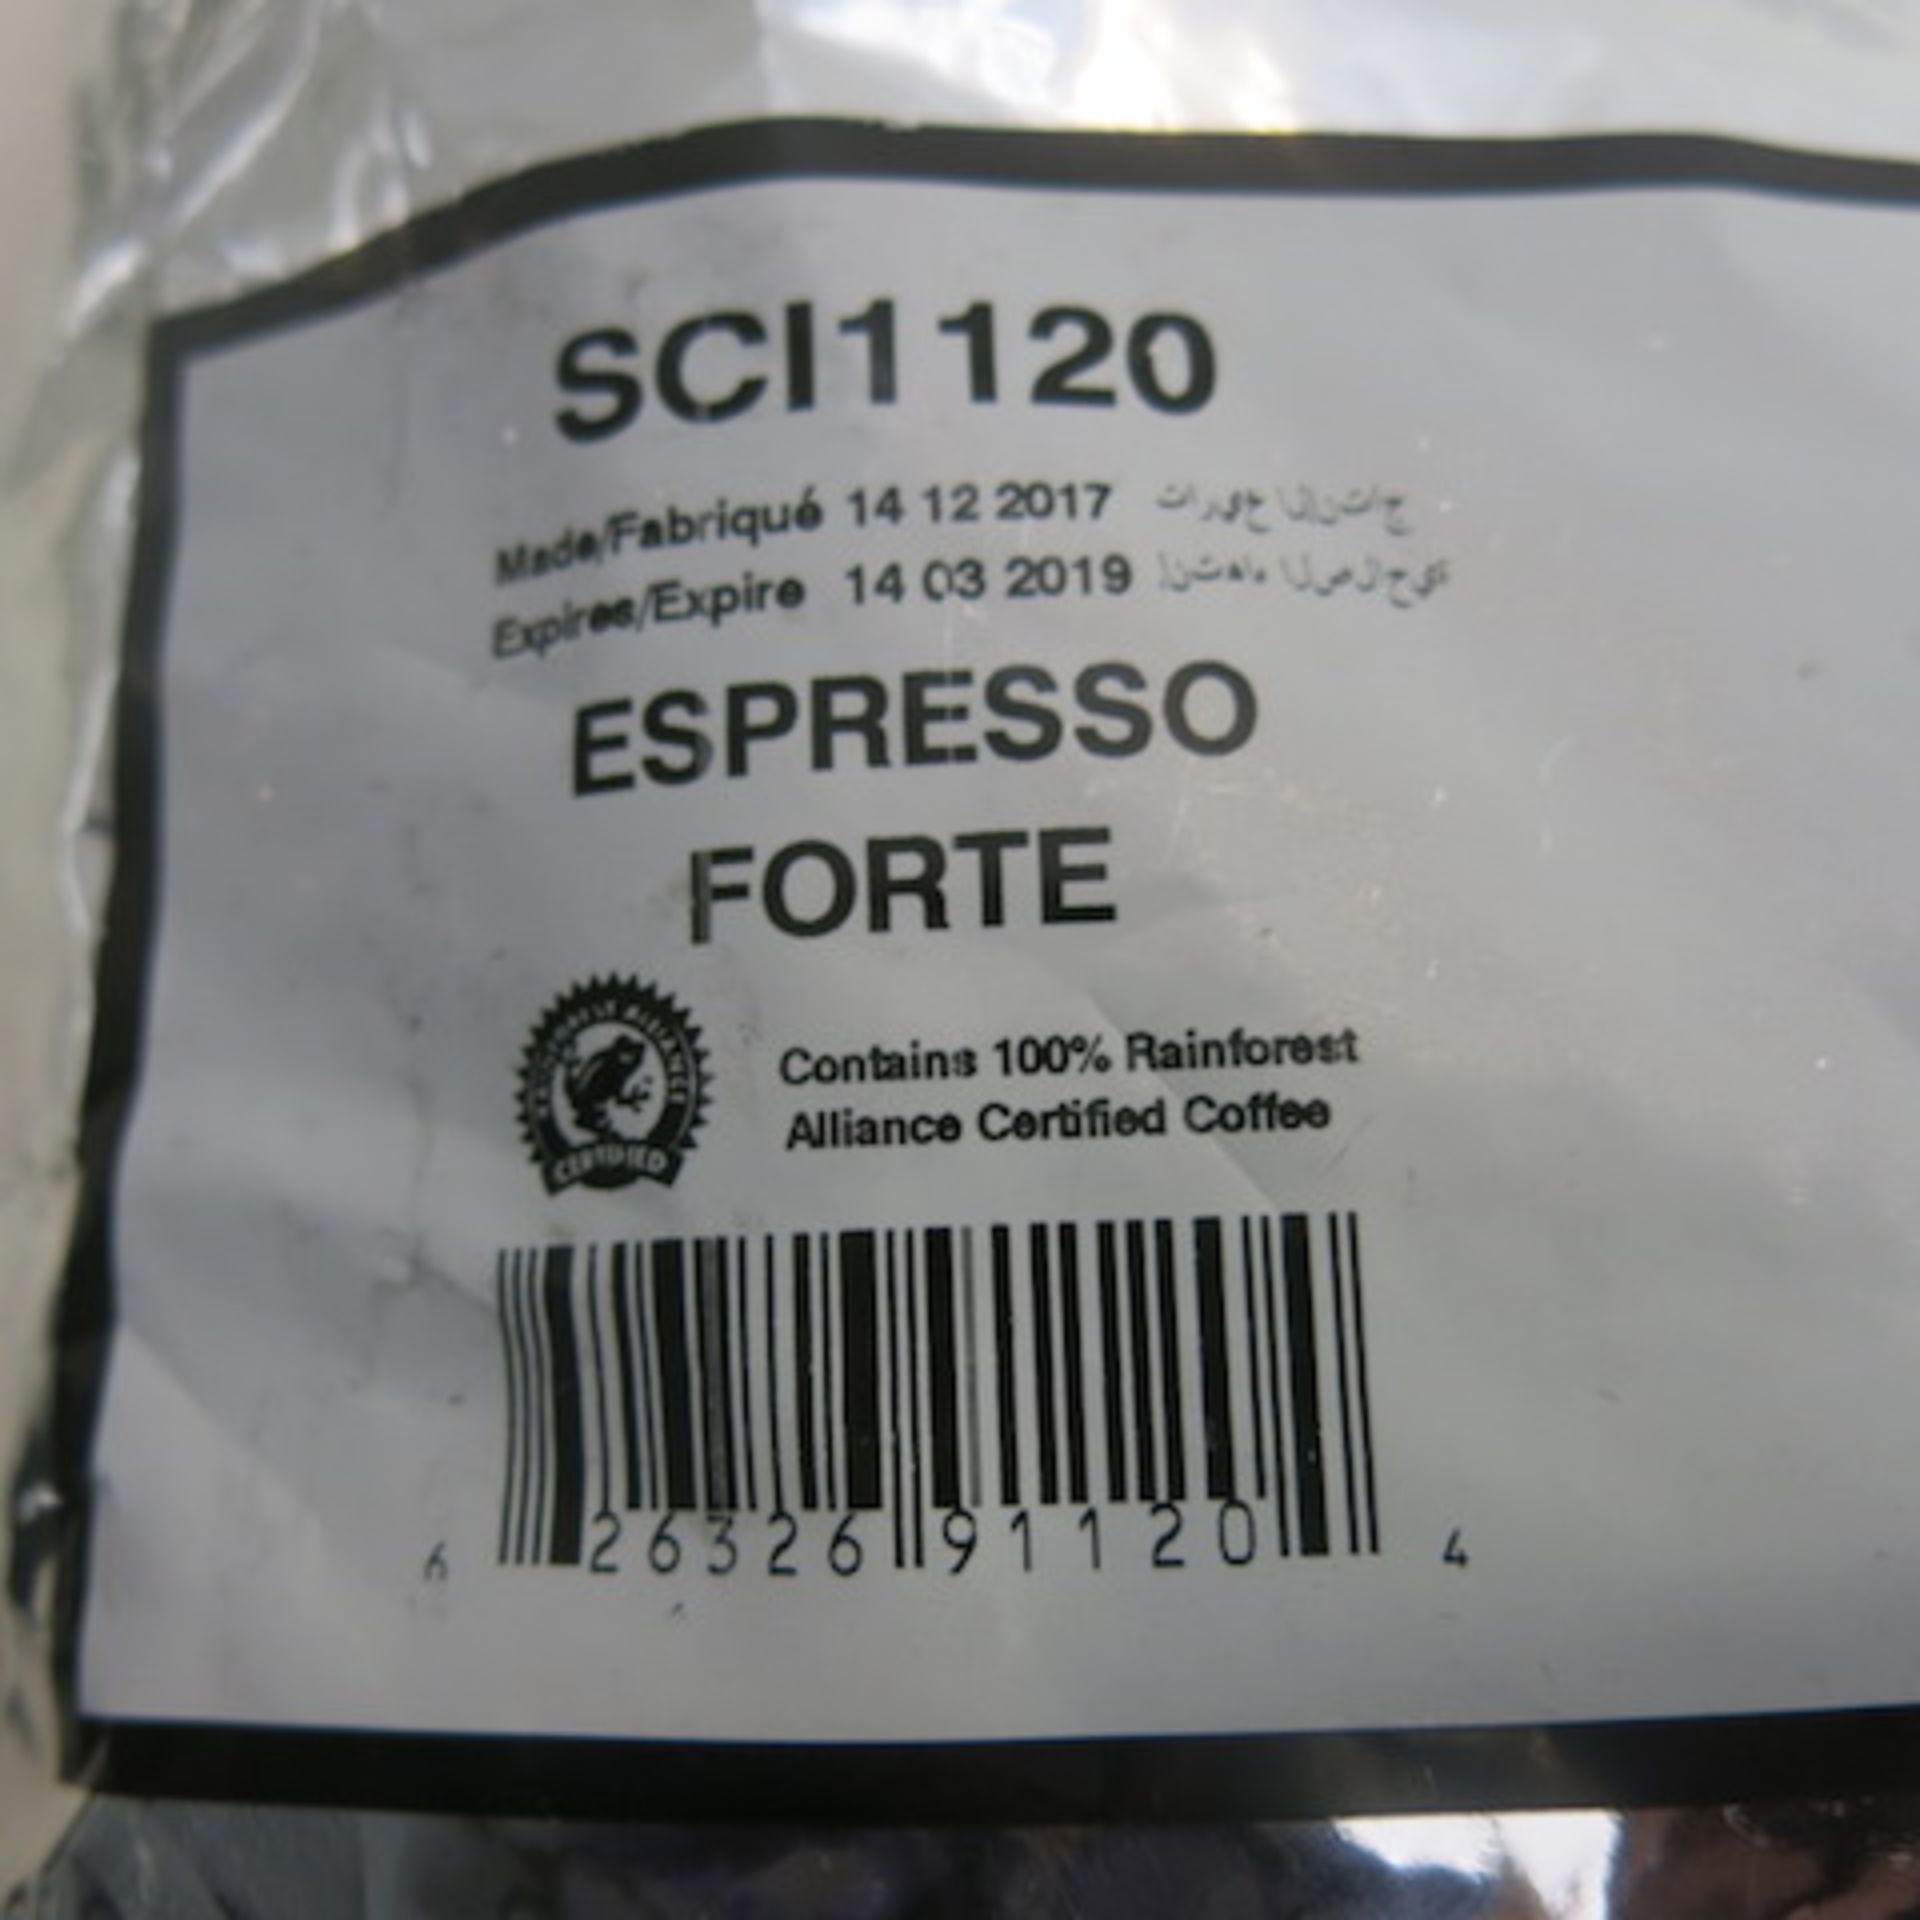 7 x 1kg Bags of Rainforest Alliance Certified Whole Bean Coffee to Include: 1 x Espresso Forte & 3 x - Image 2 of 11